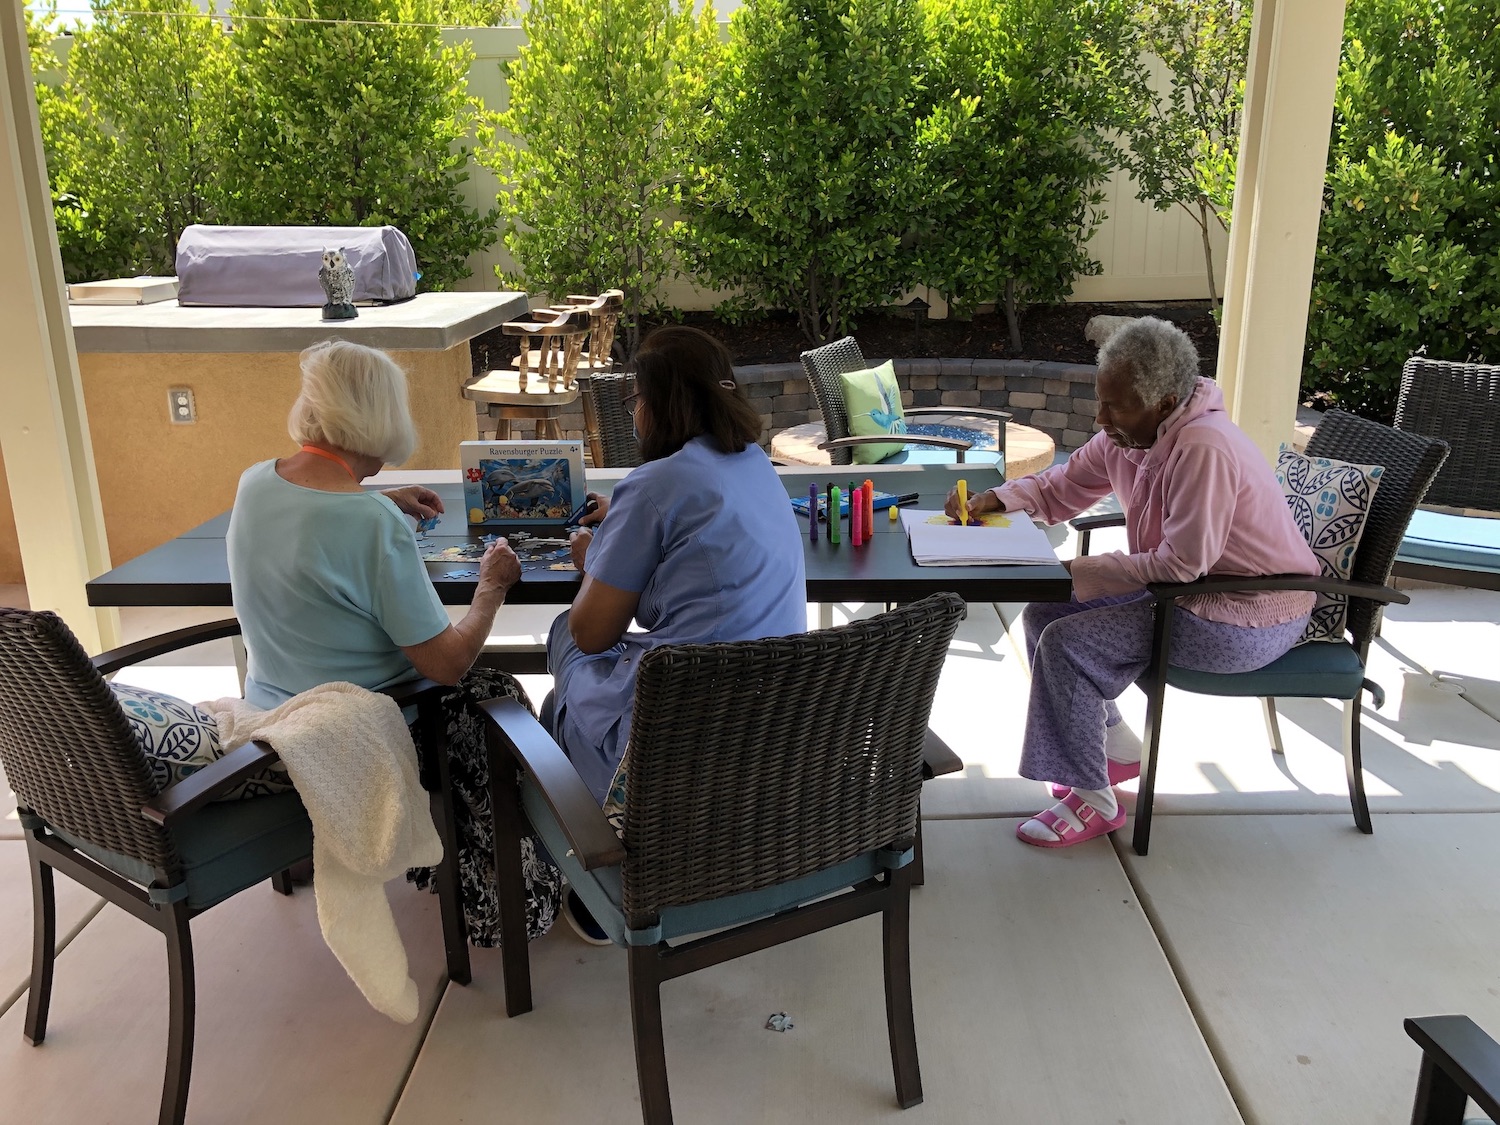 Residents working on art projects outside